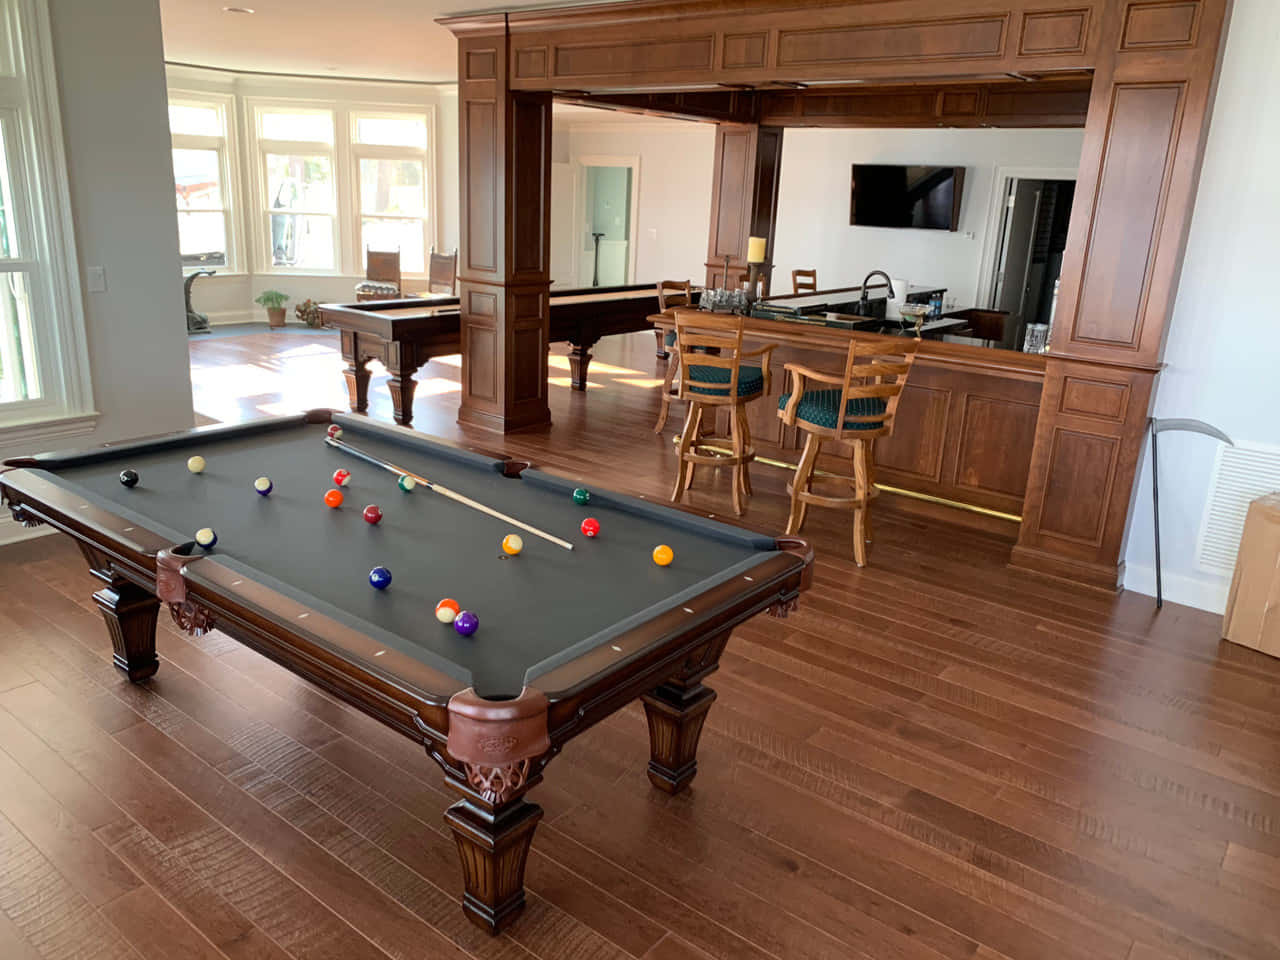 A Pool Table In A Living Room